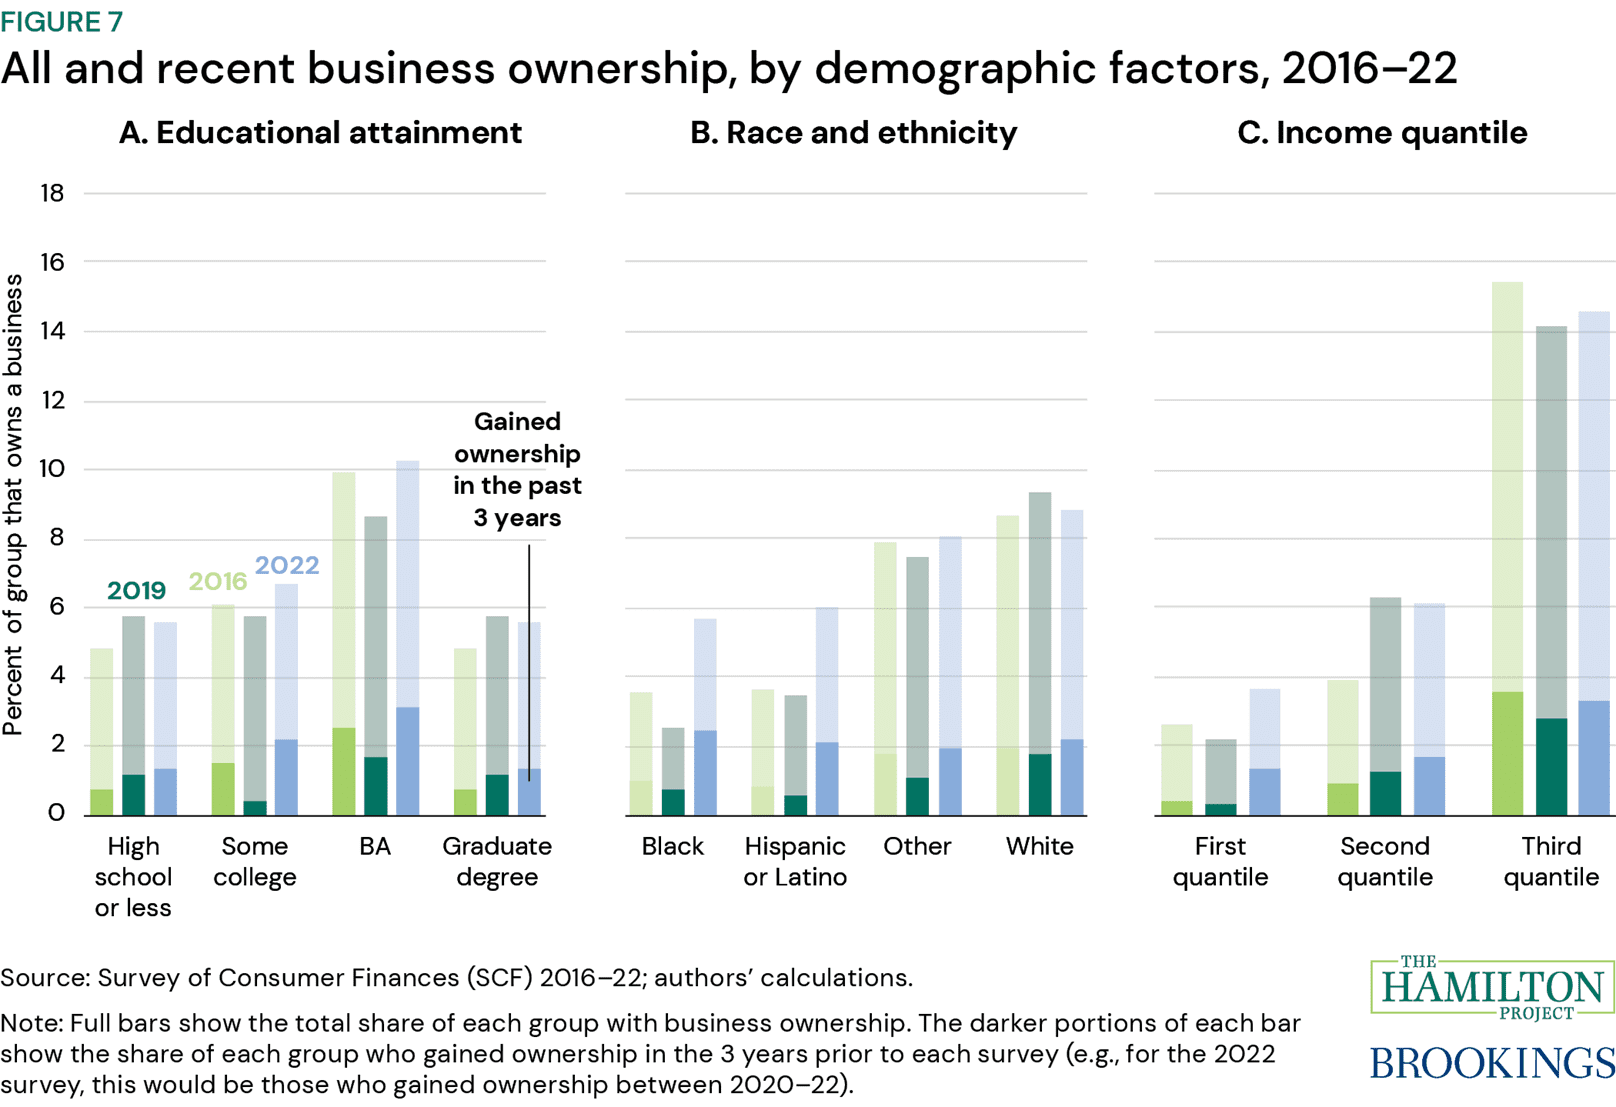 Figure 7: All and recent business ownership, by demographic factors, 2016-22. Figure 7 consolidates the information in figures 5 and 6, showing ownership gained in the three years through each survey as a share of each group’s total ownership share. 